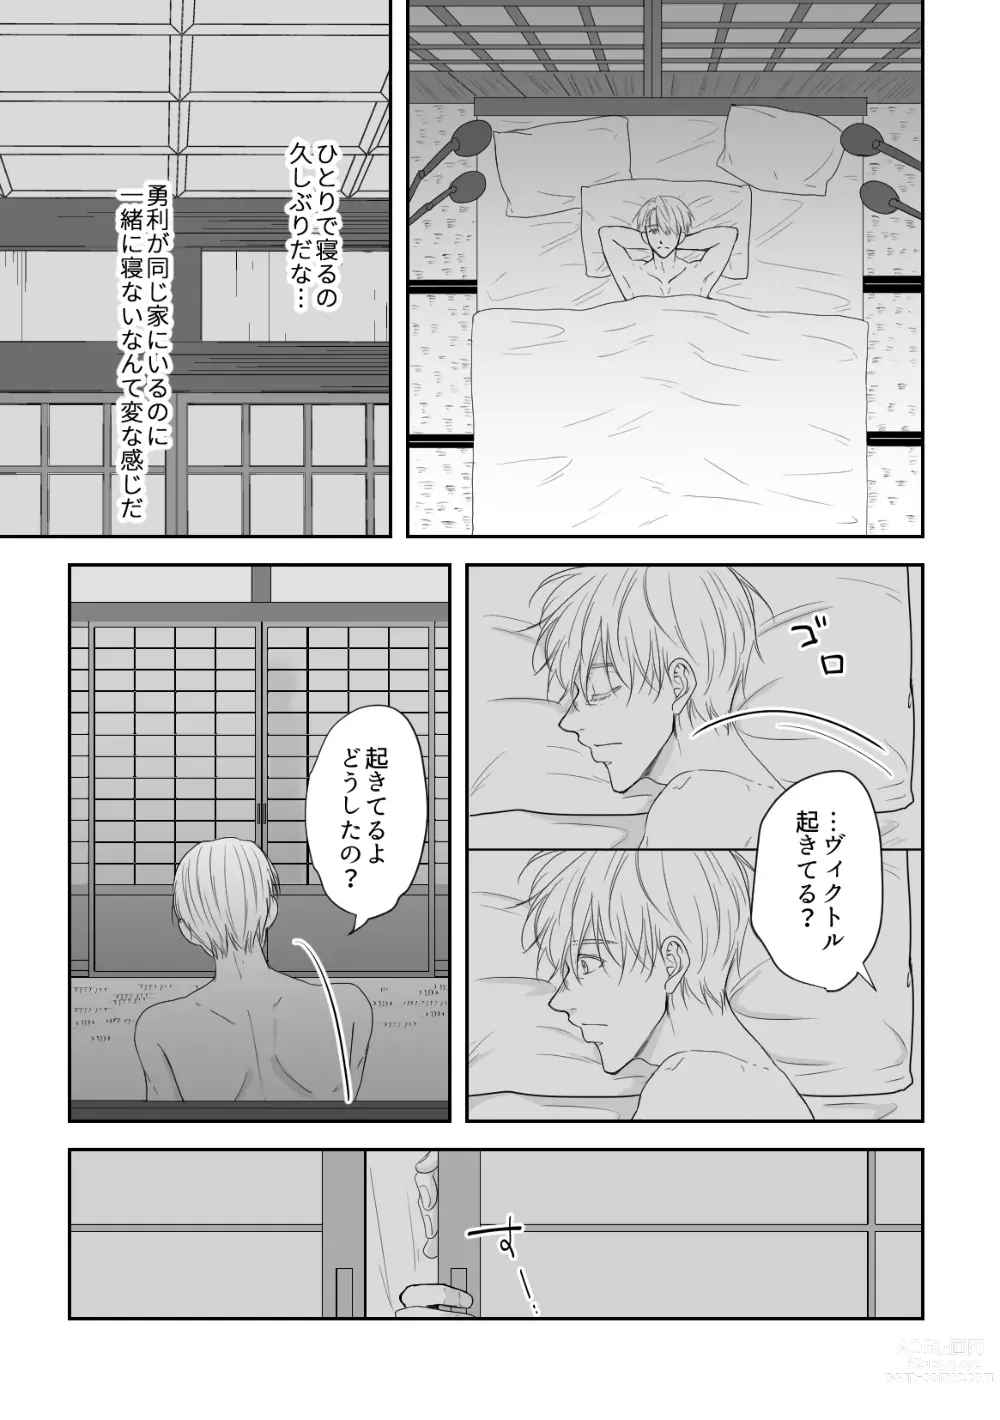 Page 55 of doujinshi Perfect two